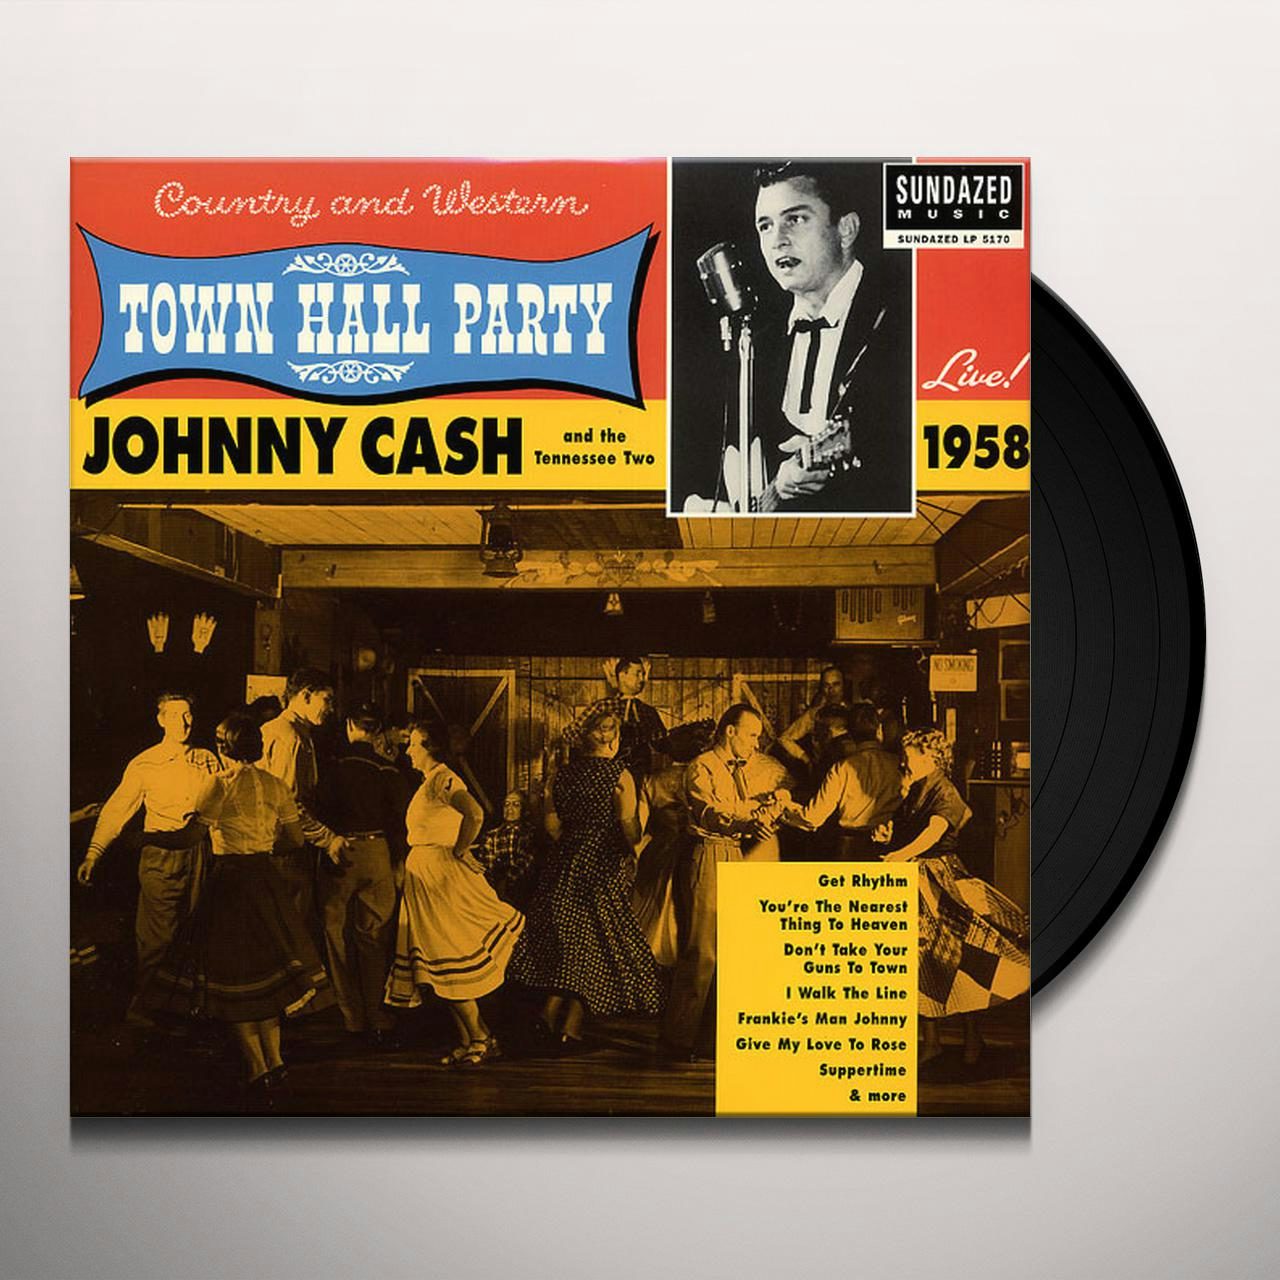 Johnny Cash Live At Town Hall Party 1958 Vinyl Record